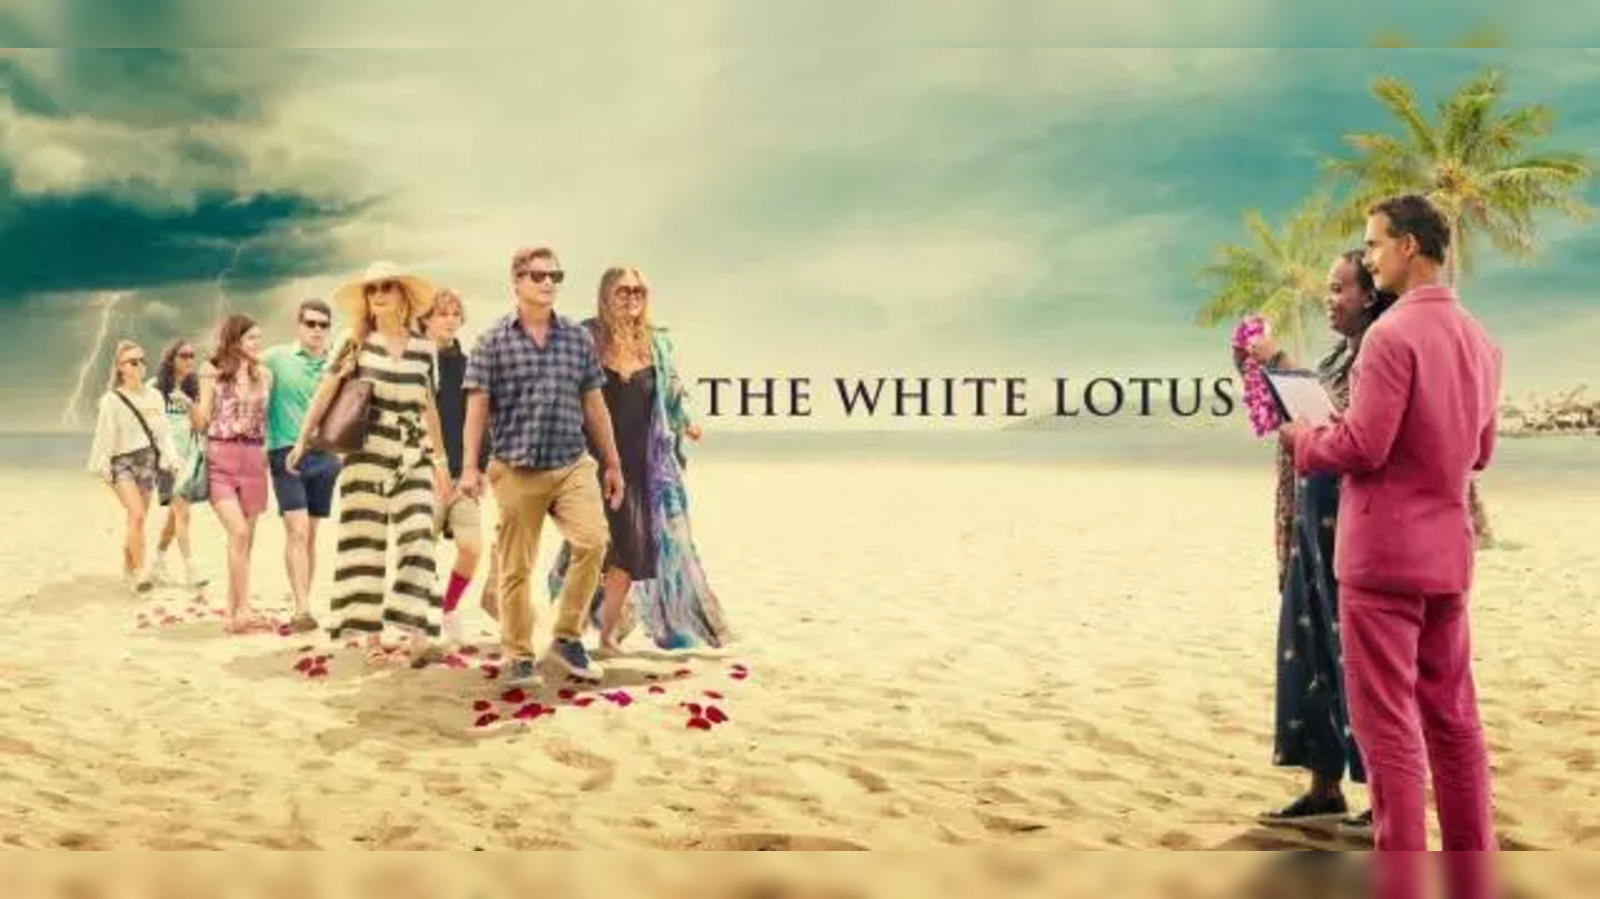 The White Lotus Season 3: The White Lotus Season 3: Here's what we know  about release, cast, filming and more - The Economic Times